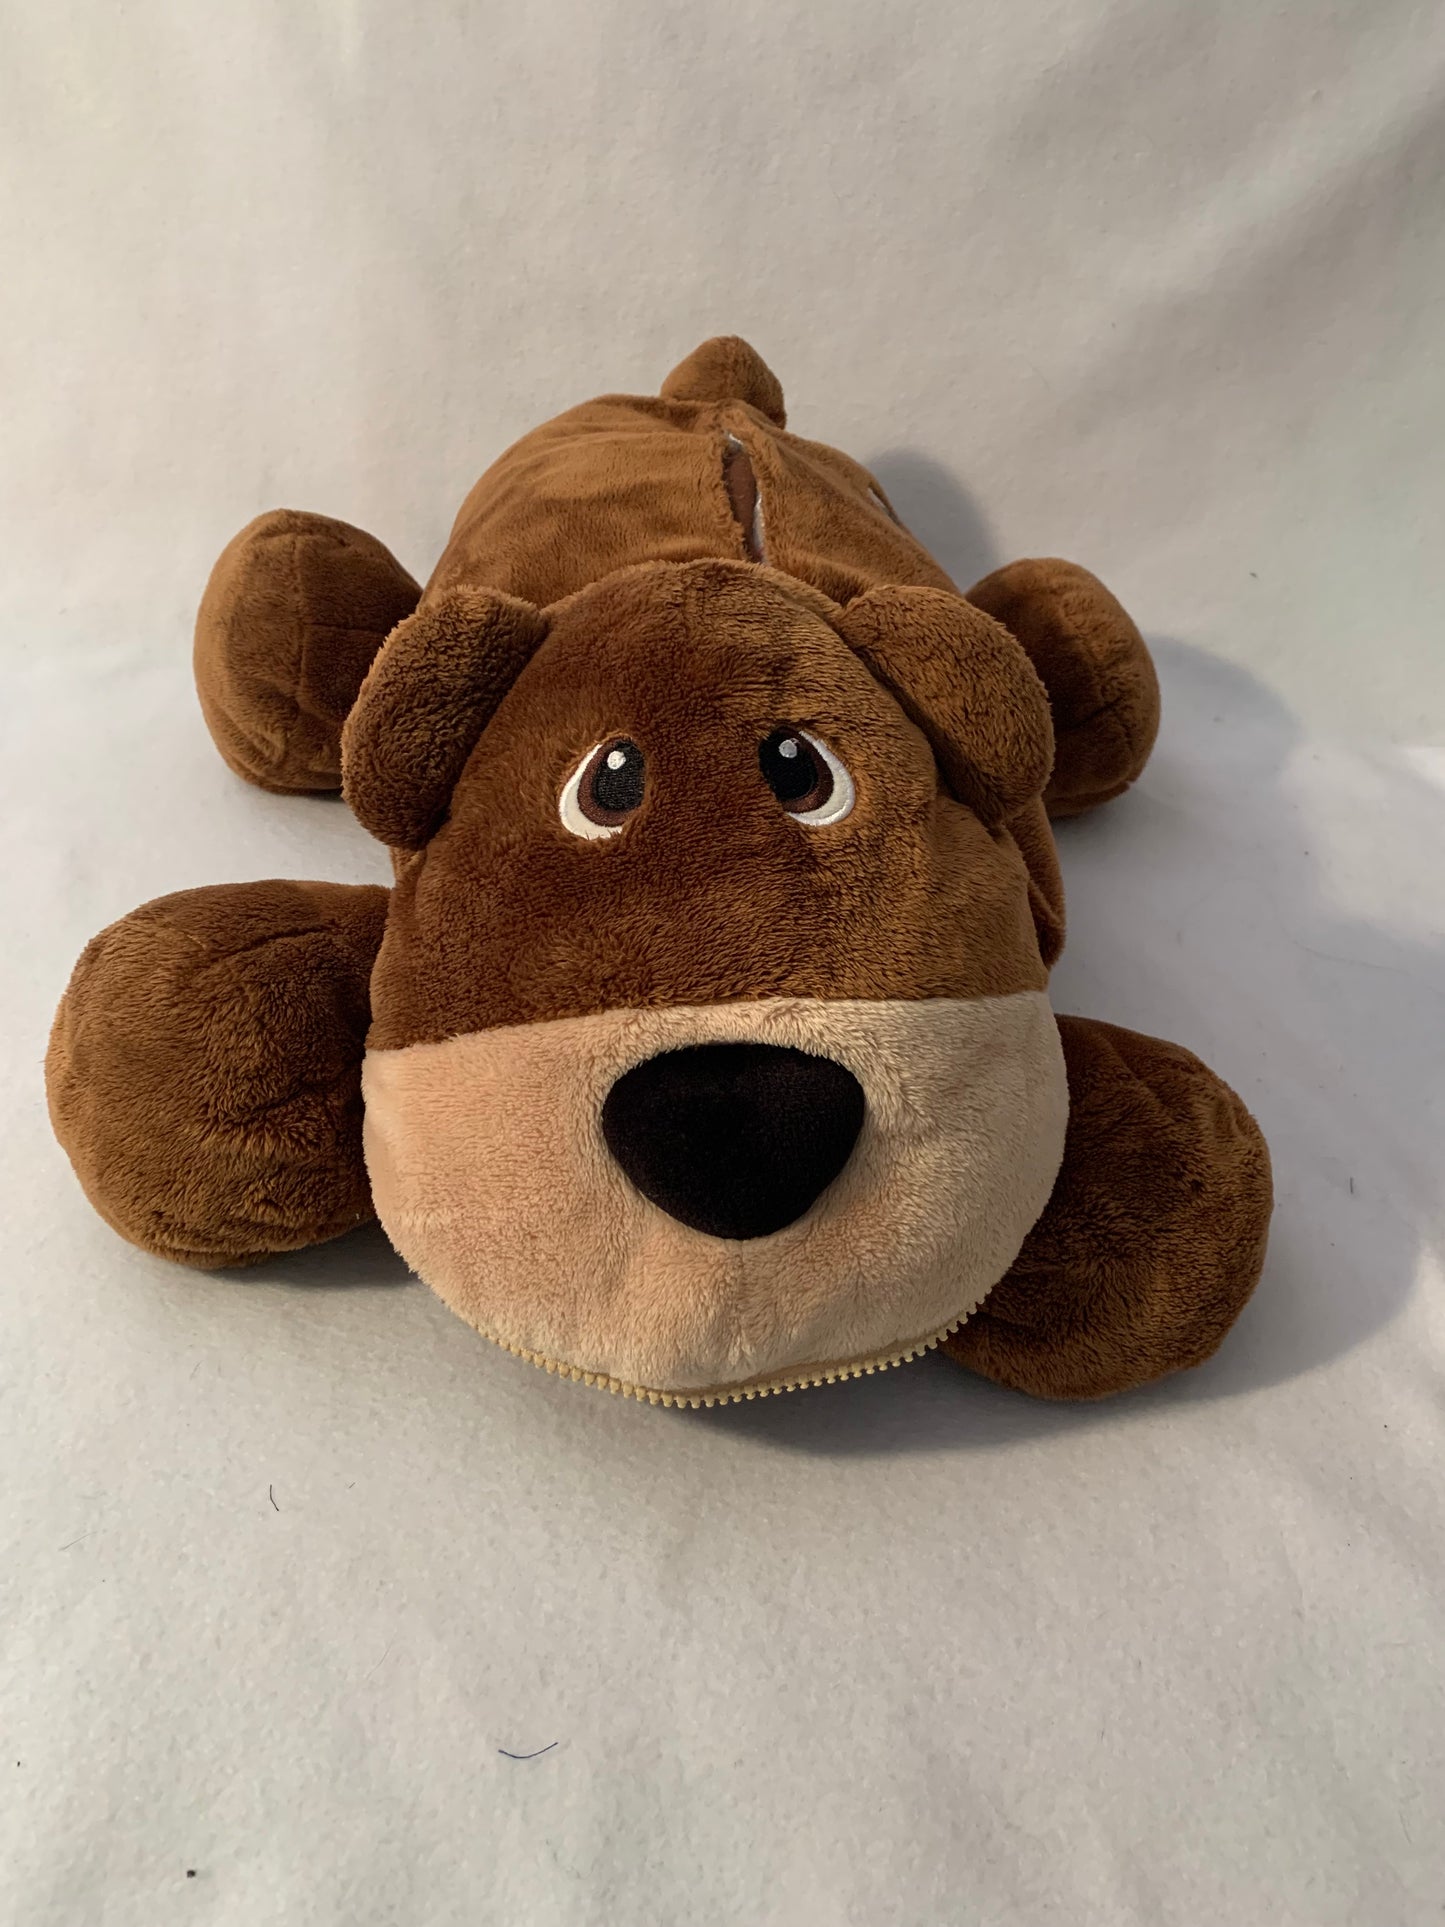 Weighted stuffed animal, JUMBO lion, hippo, dragon, bear or dinosaur sensory toy with 5-10 lbs, autism weighted buddy